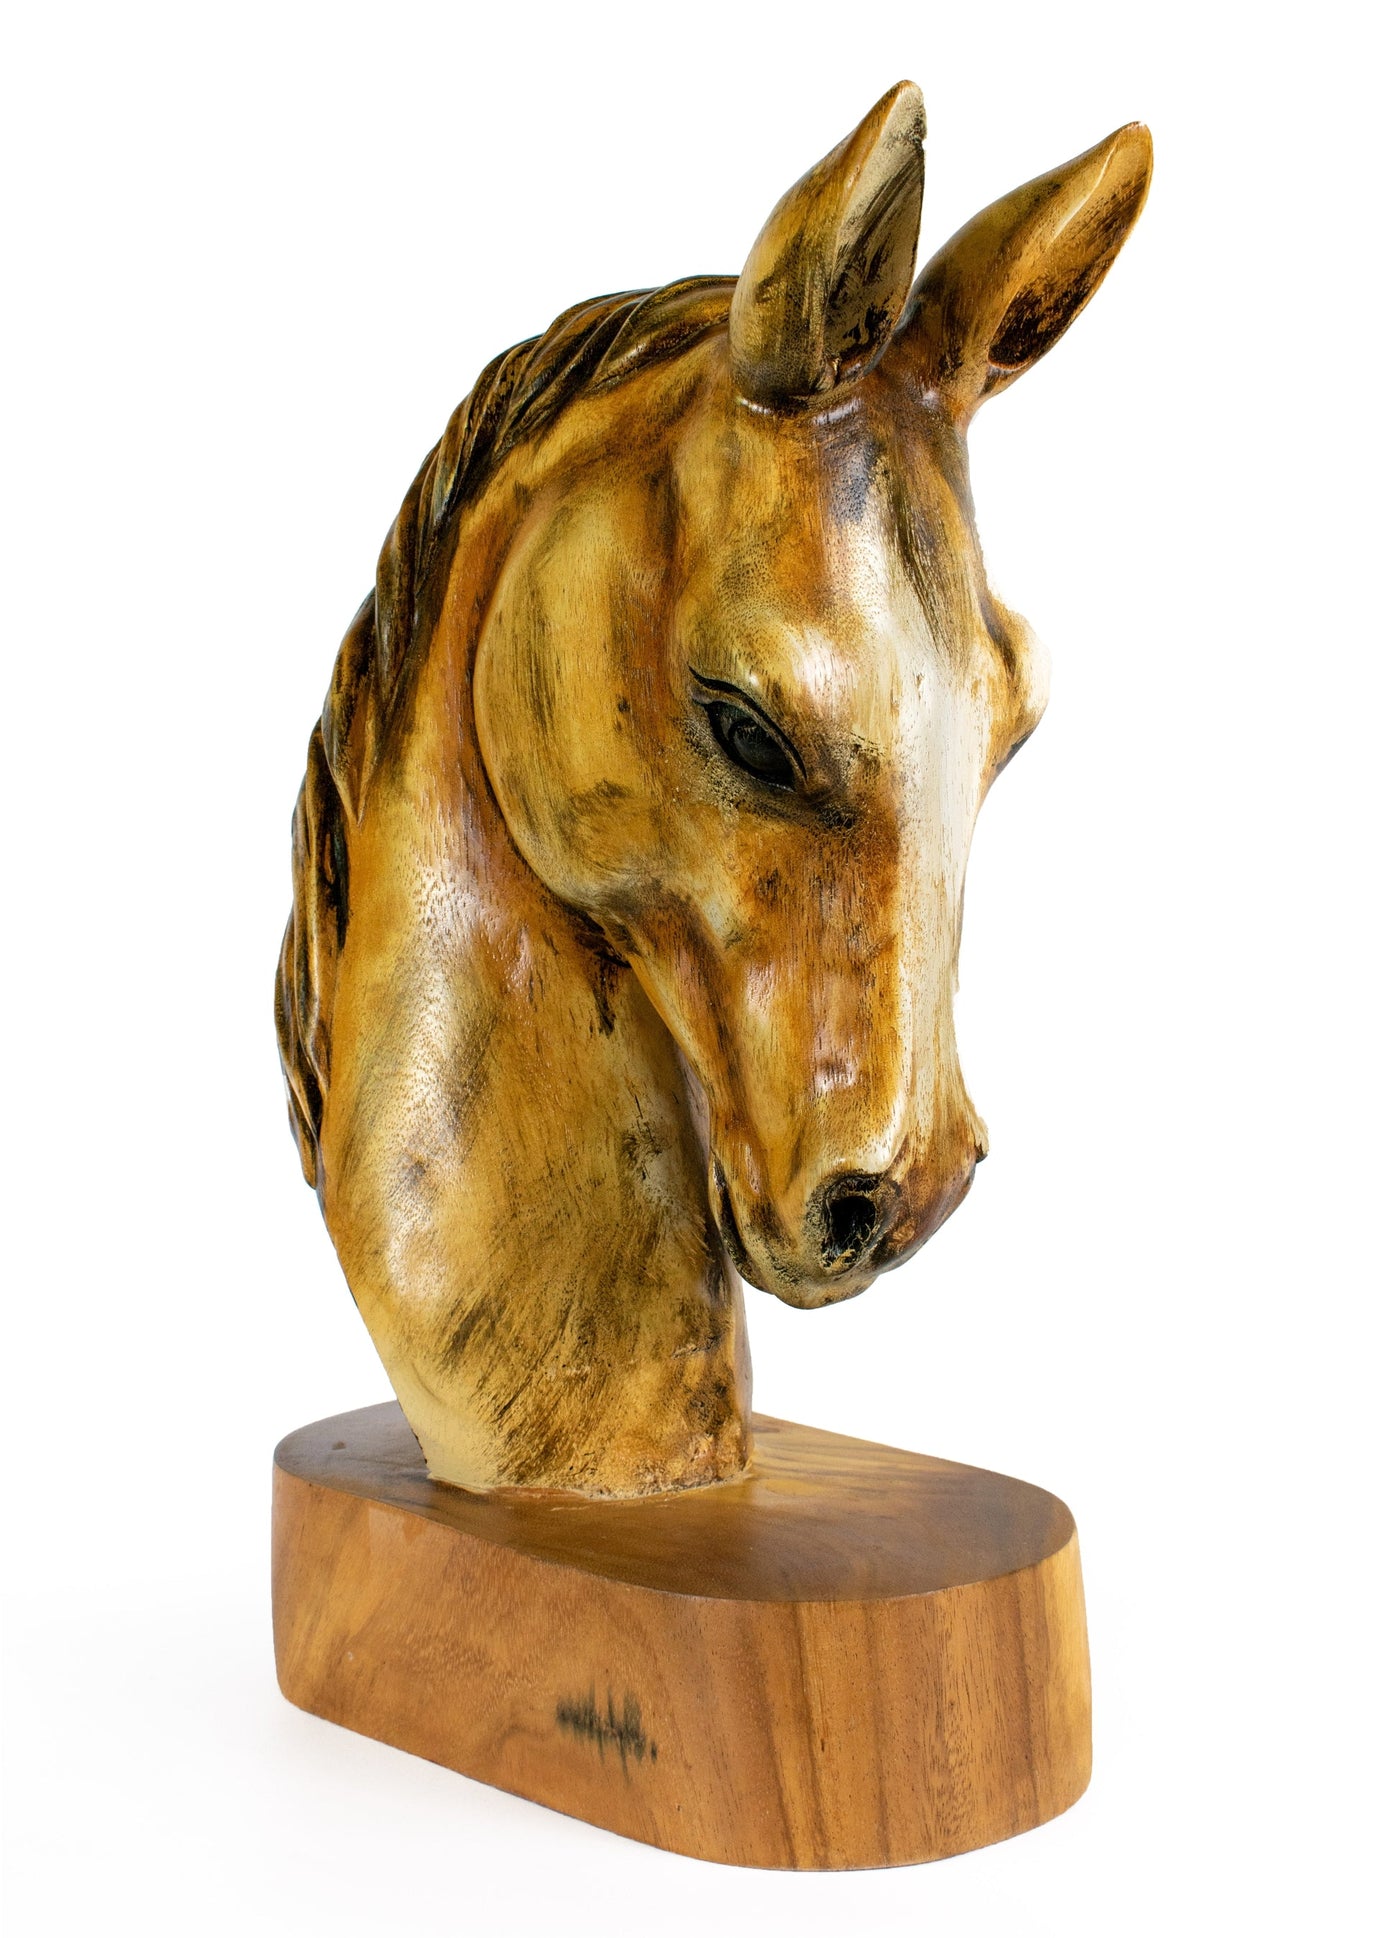 18" Solid Wood Hand Carved Horse Art Head Statue Sculpture Handcrafted Handmade Wooden Decorative Home Decor Accent Decoration Horse